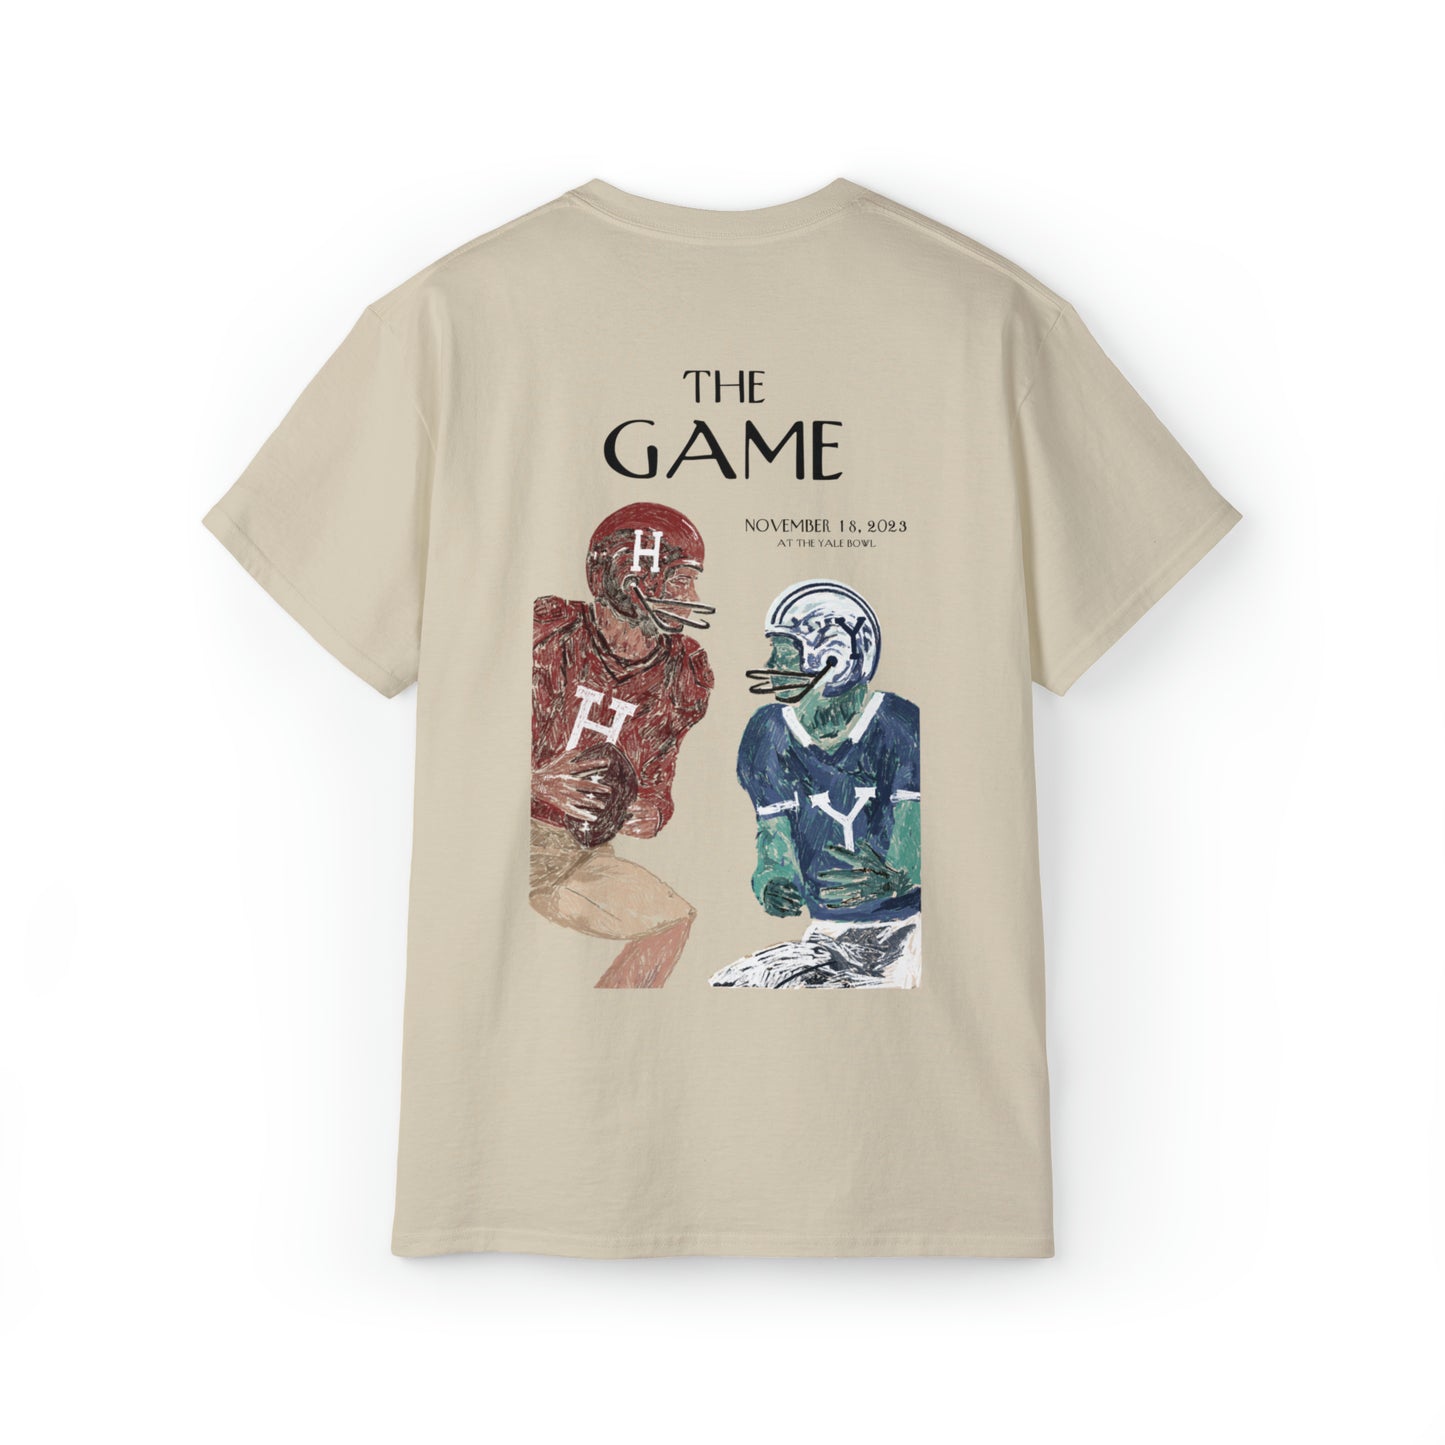 The New Yorker - T-Shirt